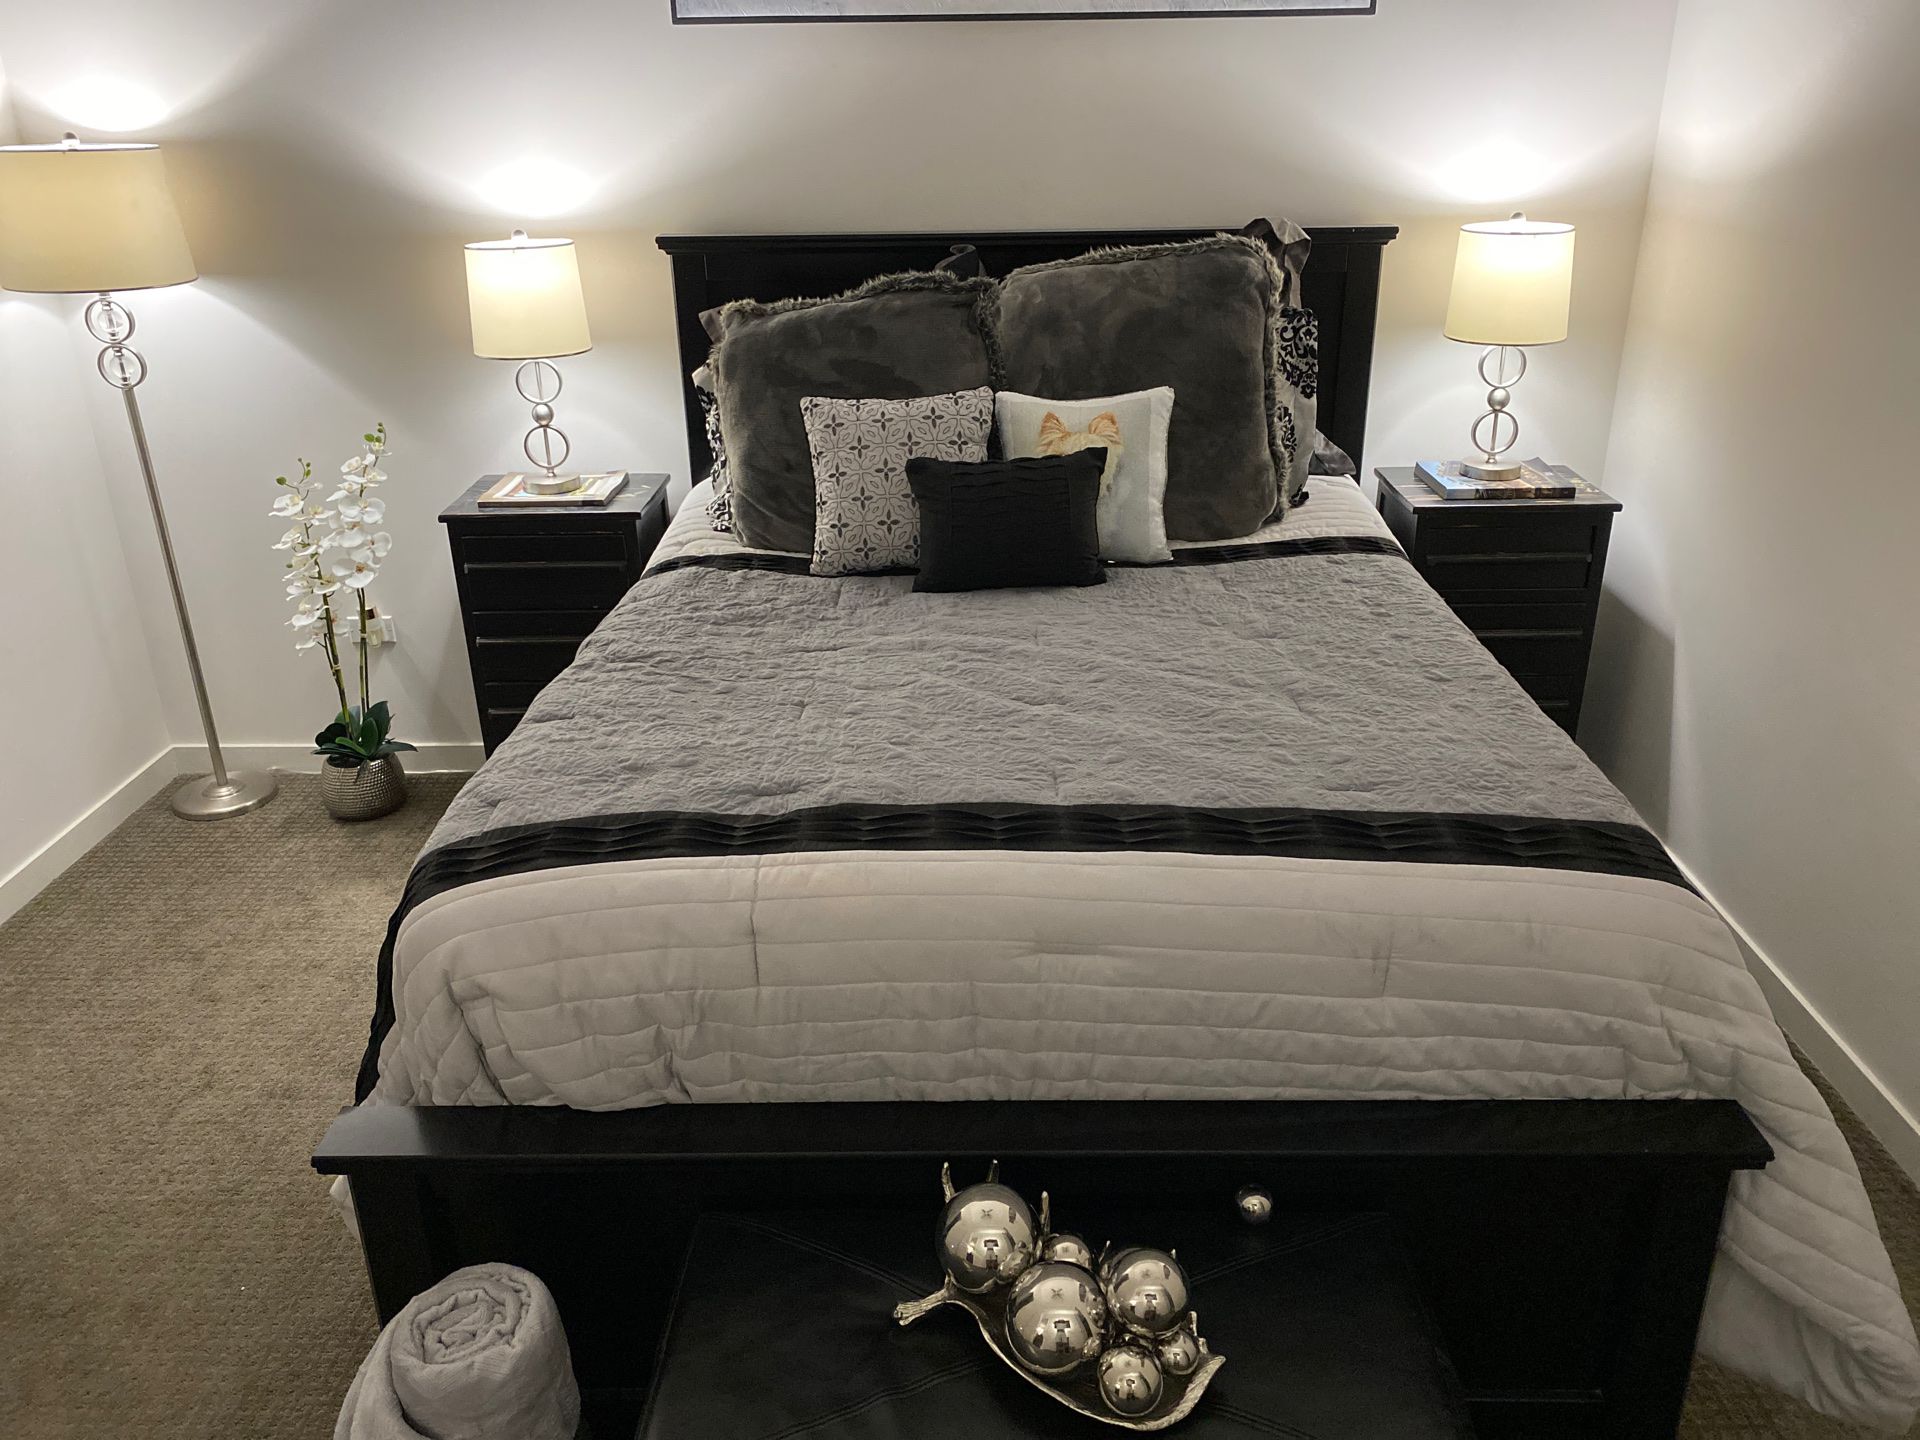 Queen bed frame and two night stands